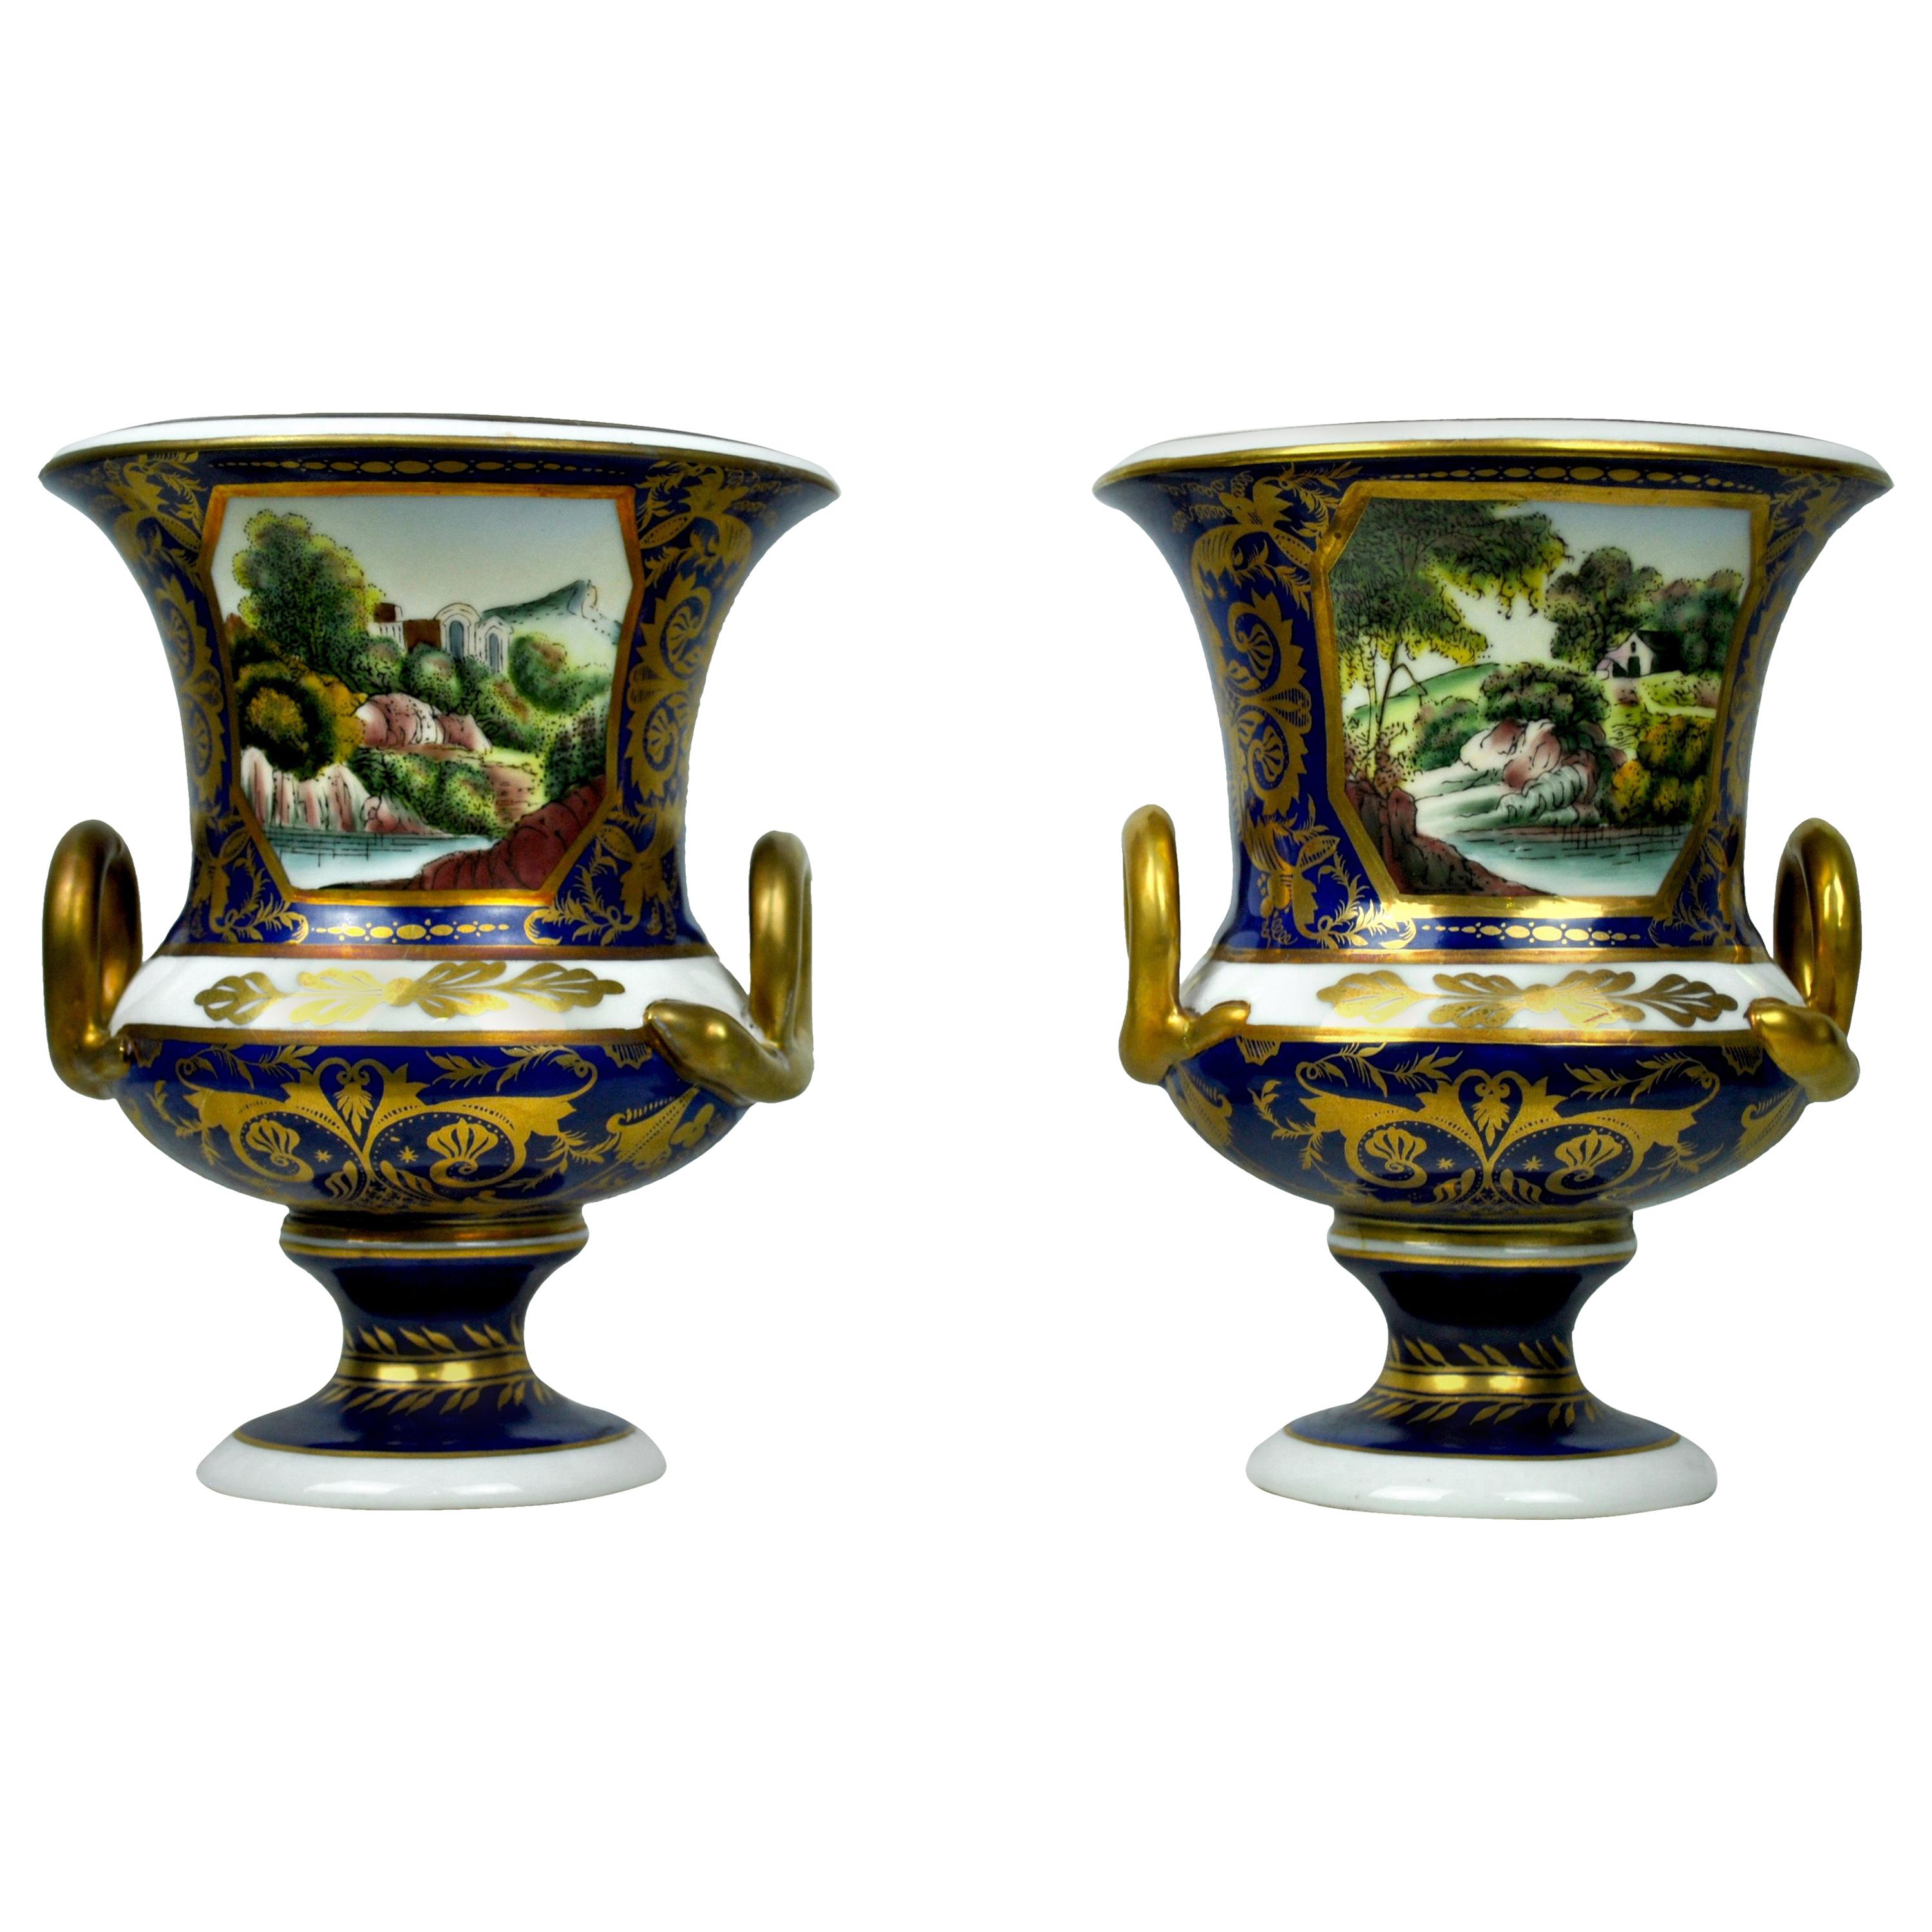 20th Century Pair of Deep Blue and Gold Hand Painted Guilt Sieve Vases For Sale